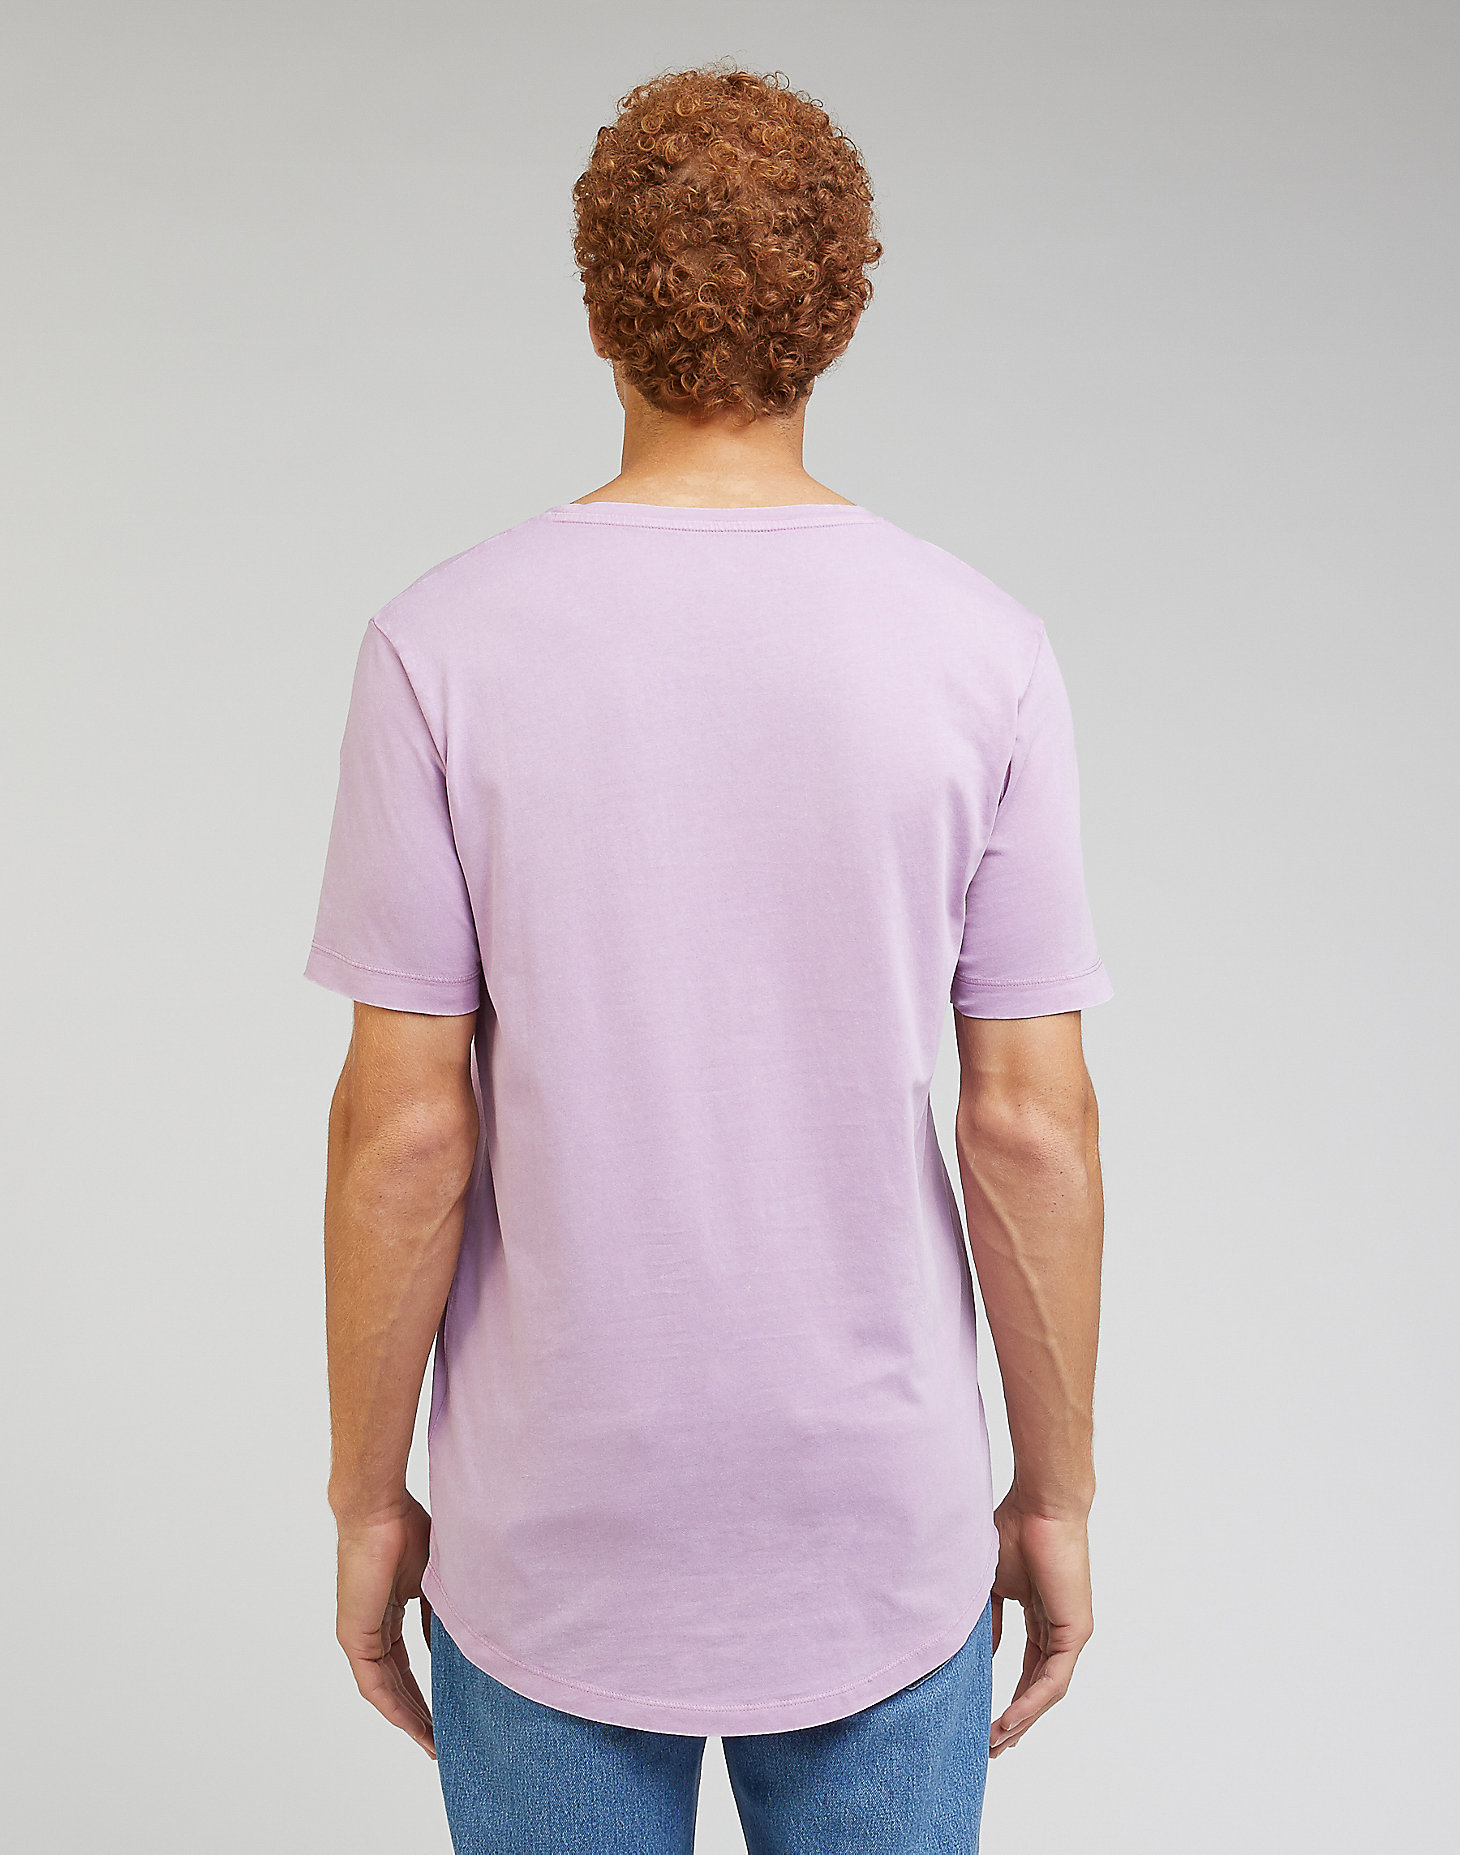 Shaped Tee in Pansy alternative view 1